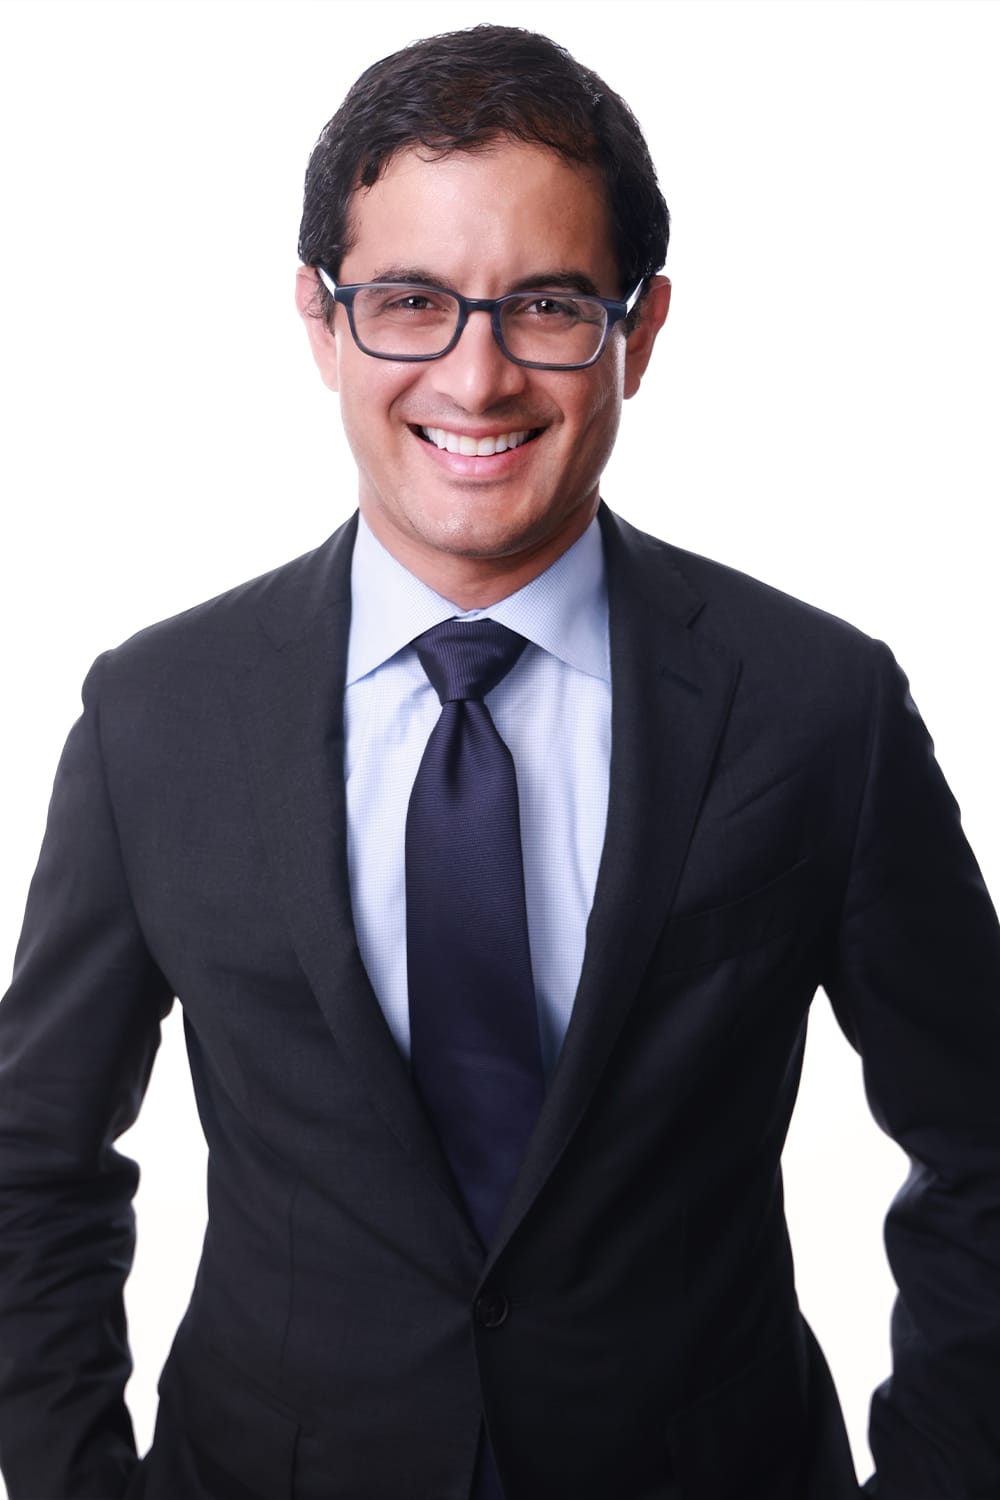 A smiling man in a suit and tie with professional headshots.